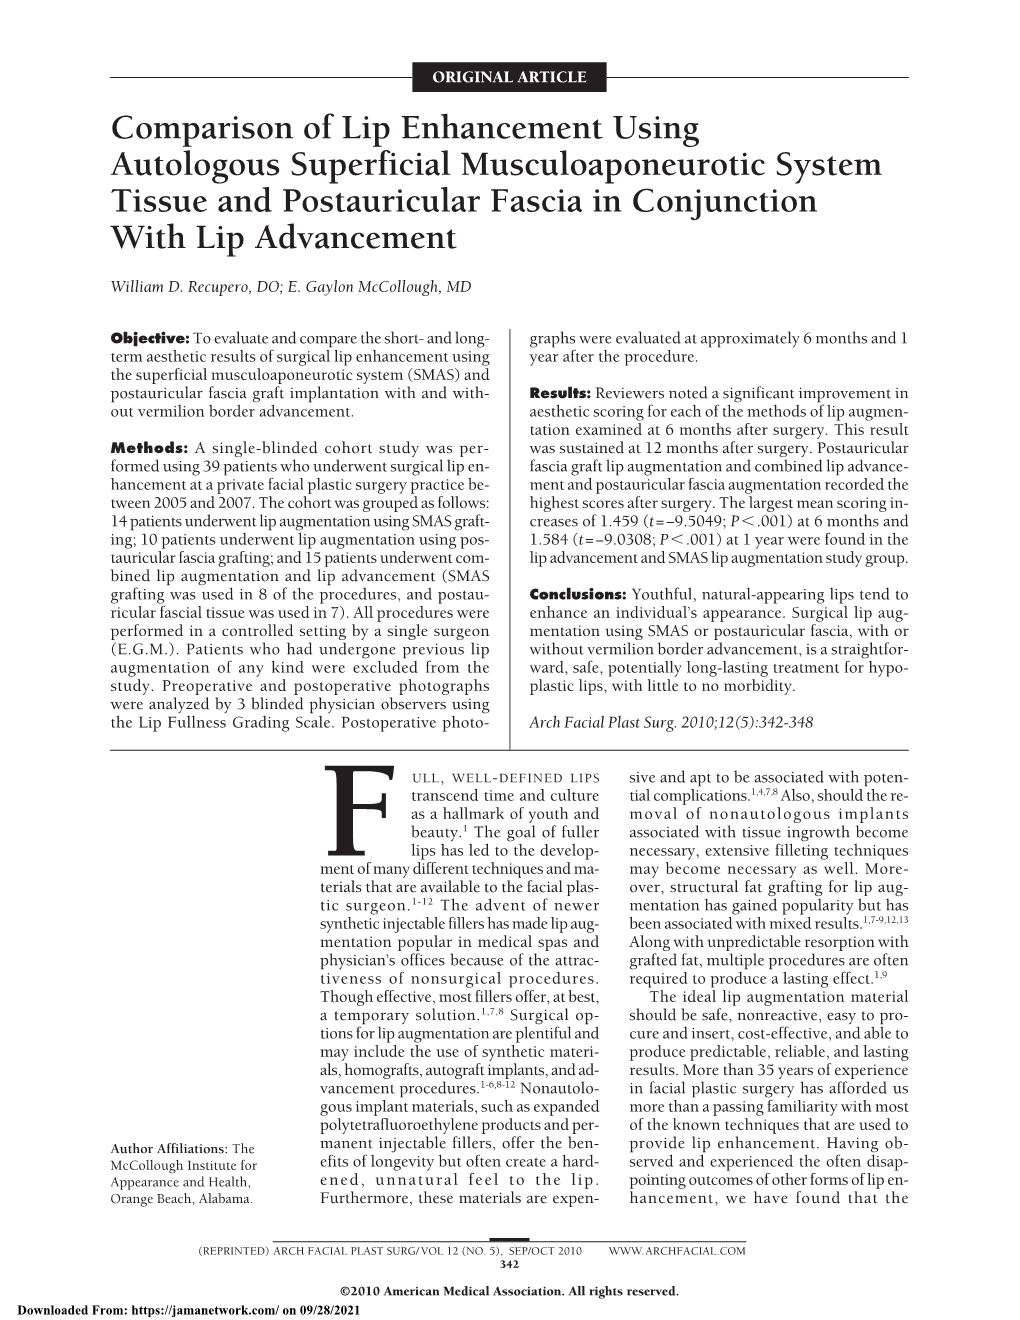 Comparison of Lip Enhancement Using Autologous Superficial Musculoaponeurotic System Tissue and Postauricular Fascia in Conjunction with Lip Advancement